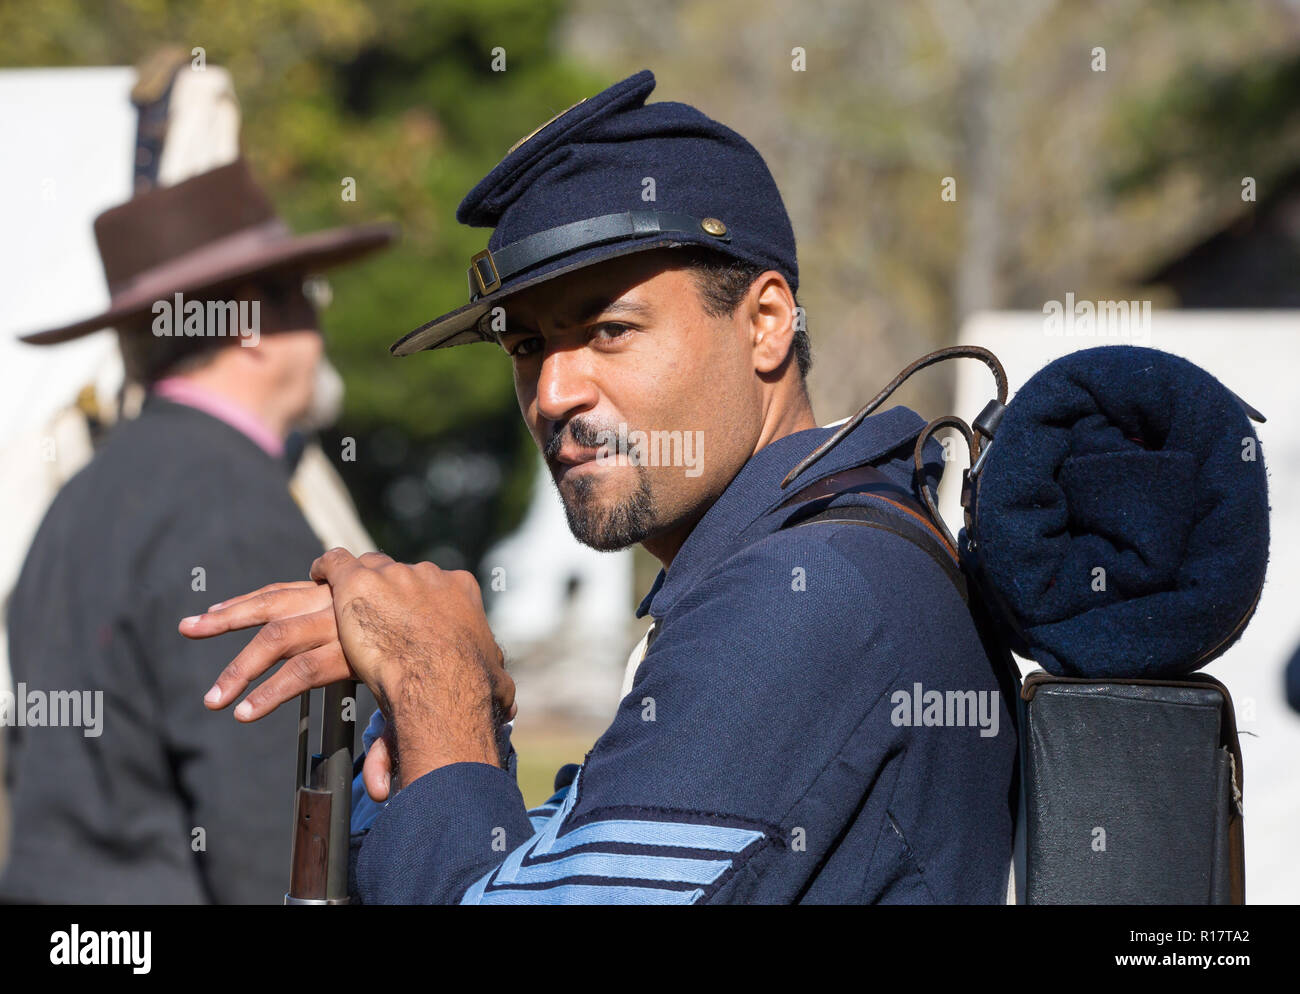 MCCONNELLS, SC (USA) - November 3, 2018:  Closeup portrait of an African-American reenactor portraying a Union soldier at an American Civil War reenac Stock Photo